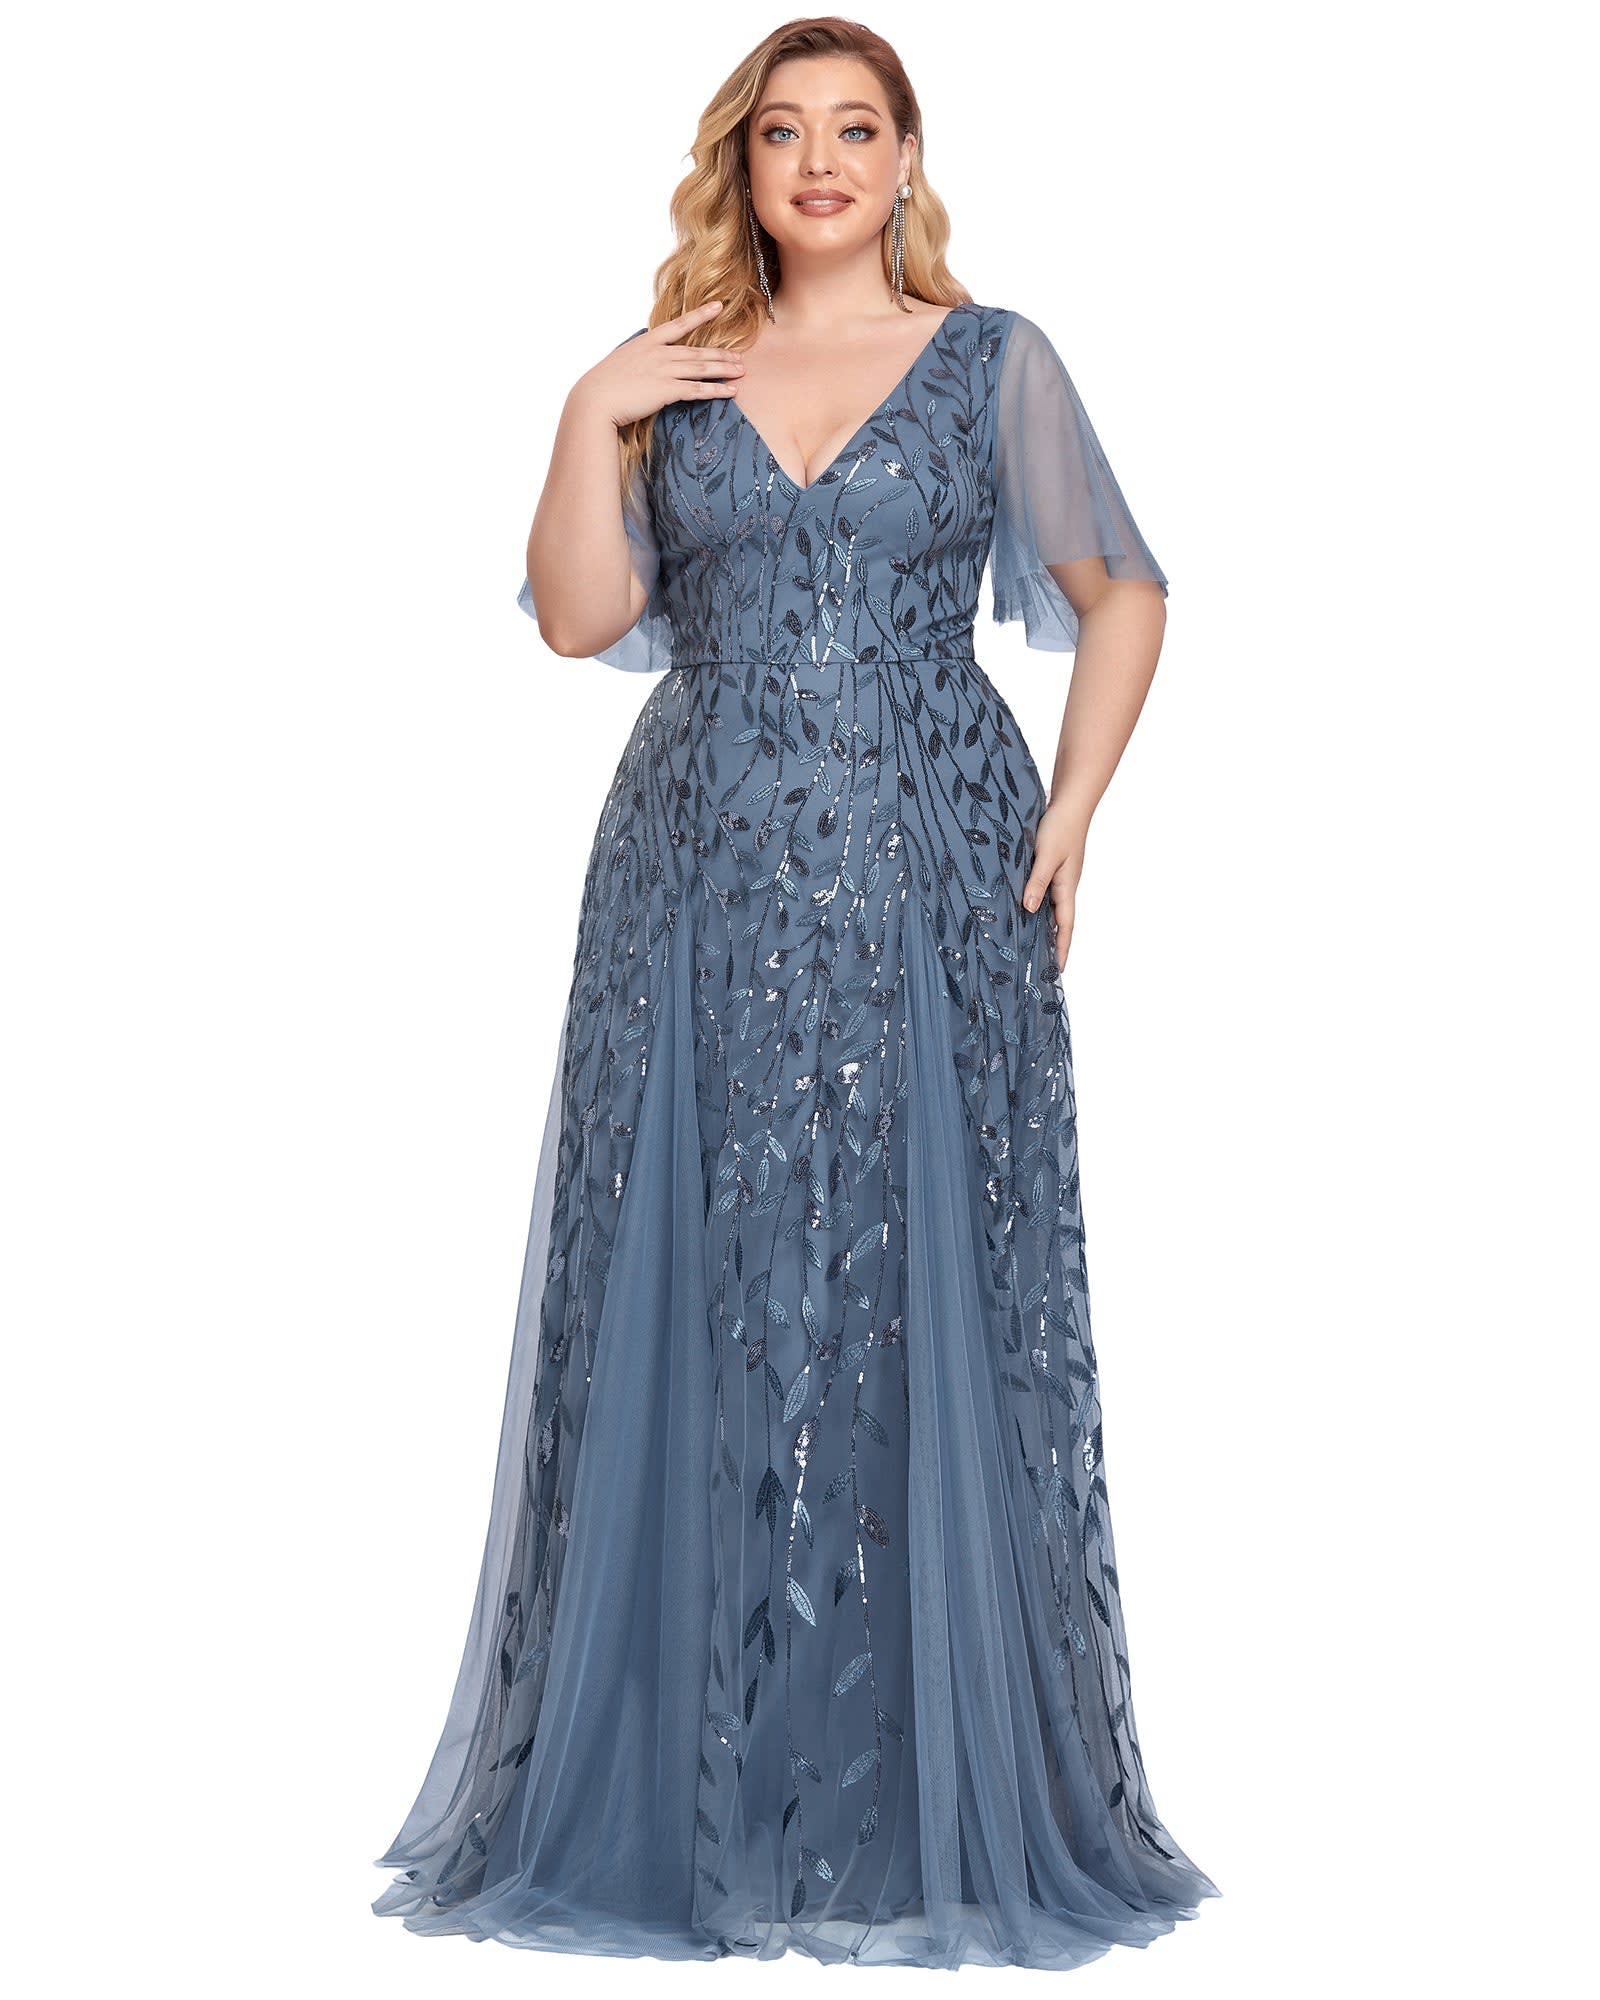 Best Plus-size Mother Of The Groom Dress